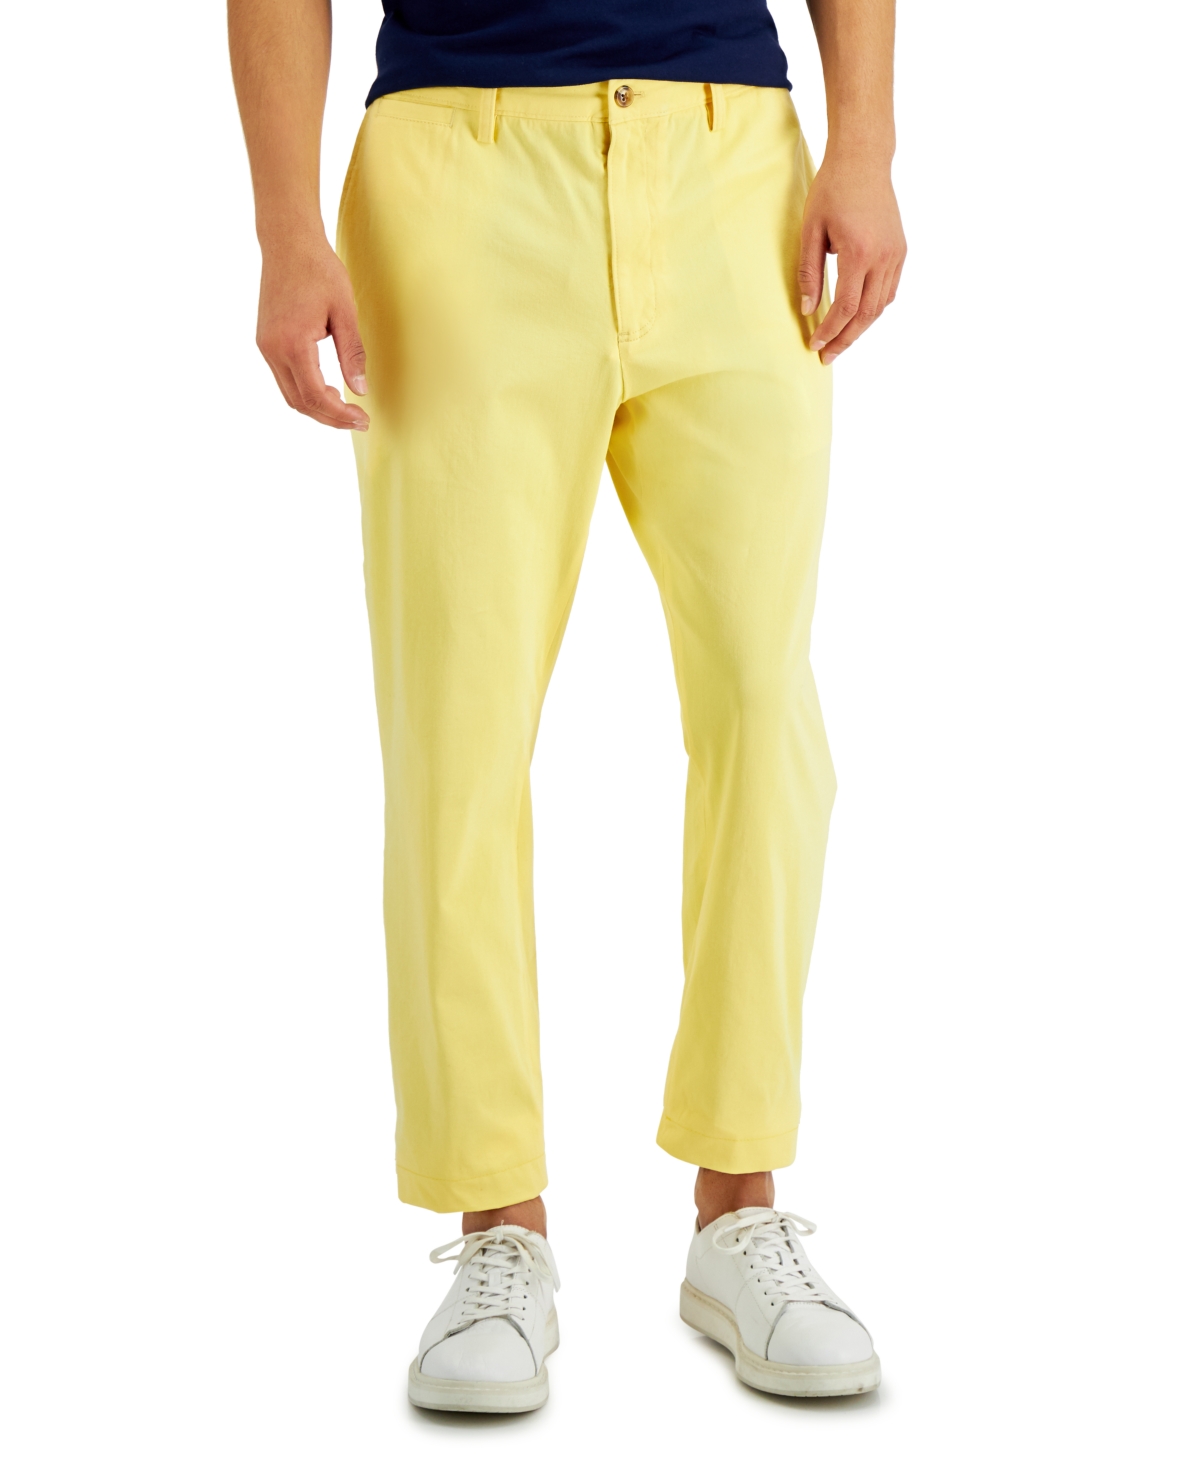 Men's Four-Way Stretch Pants, Created for Macy's - Sunwash Yellow